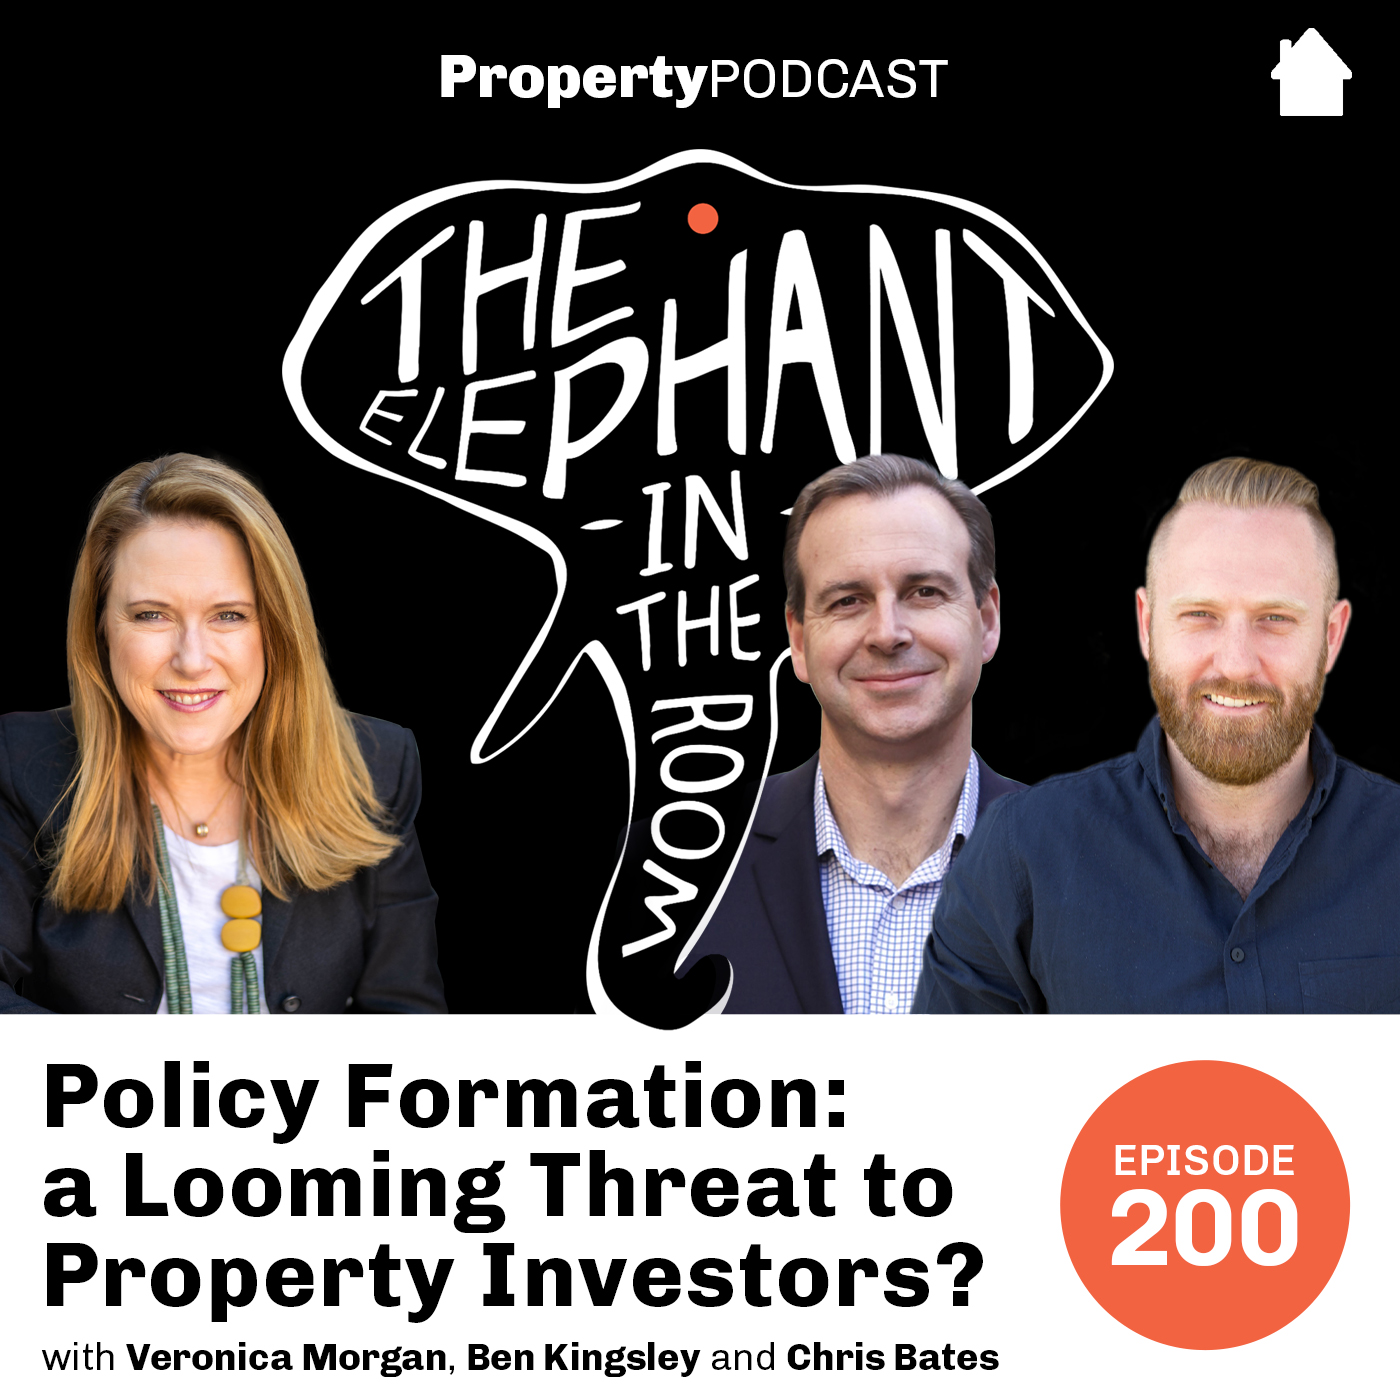 Ben Kingsley | Policy Formation: a Looming Threat to Property Investors?